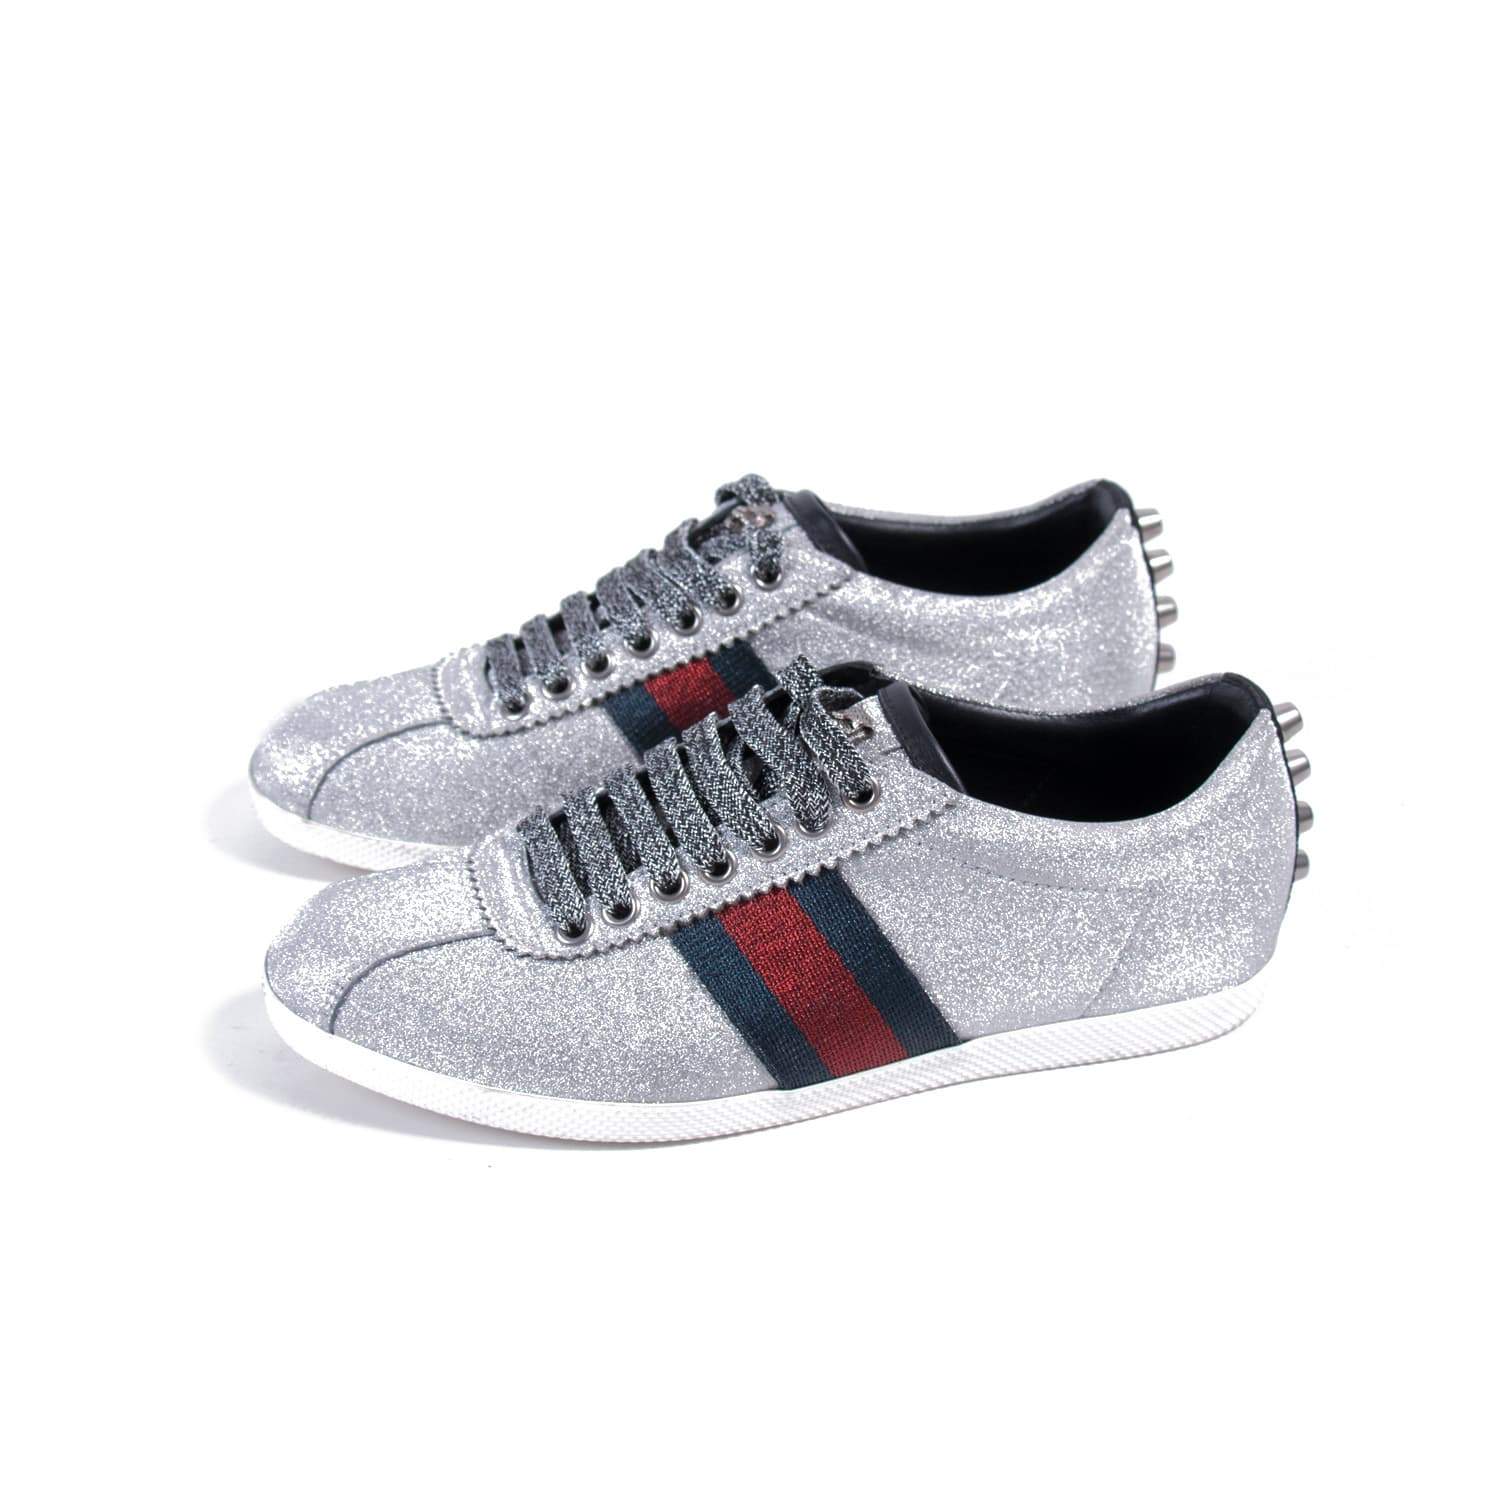 Buy & Consign Authentic Gucci Glitter Fabric Studded Web Sneakers Silver 36 at The Plush Posh